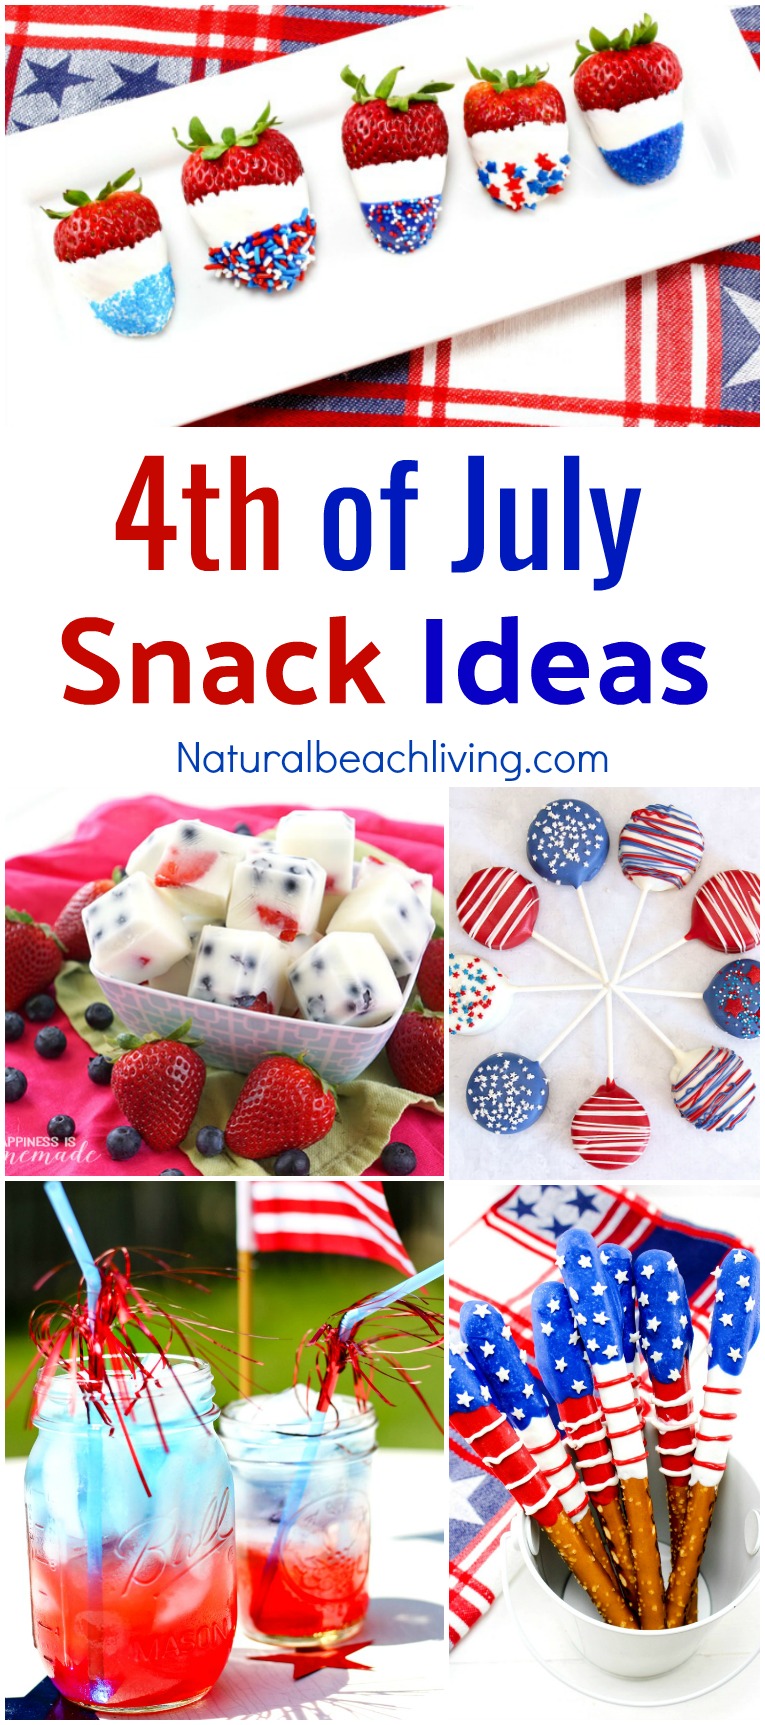 15+ Fourth of July Snacks for Kids – Delicious Red, White and Blue Snacks